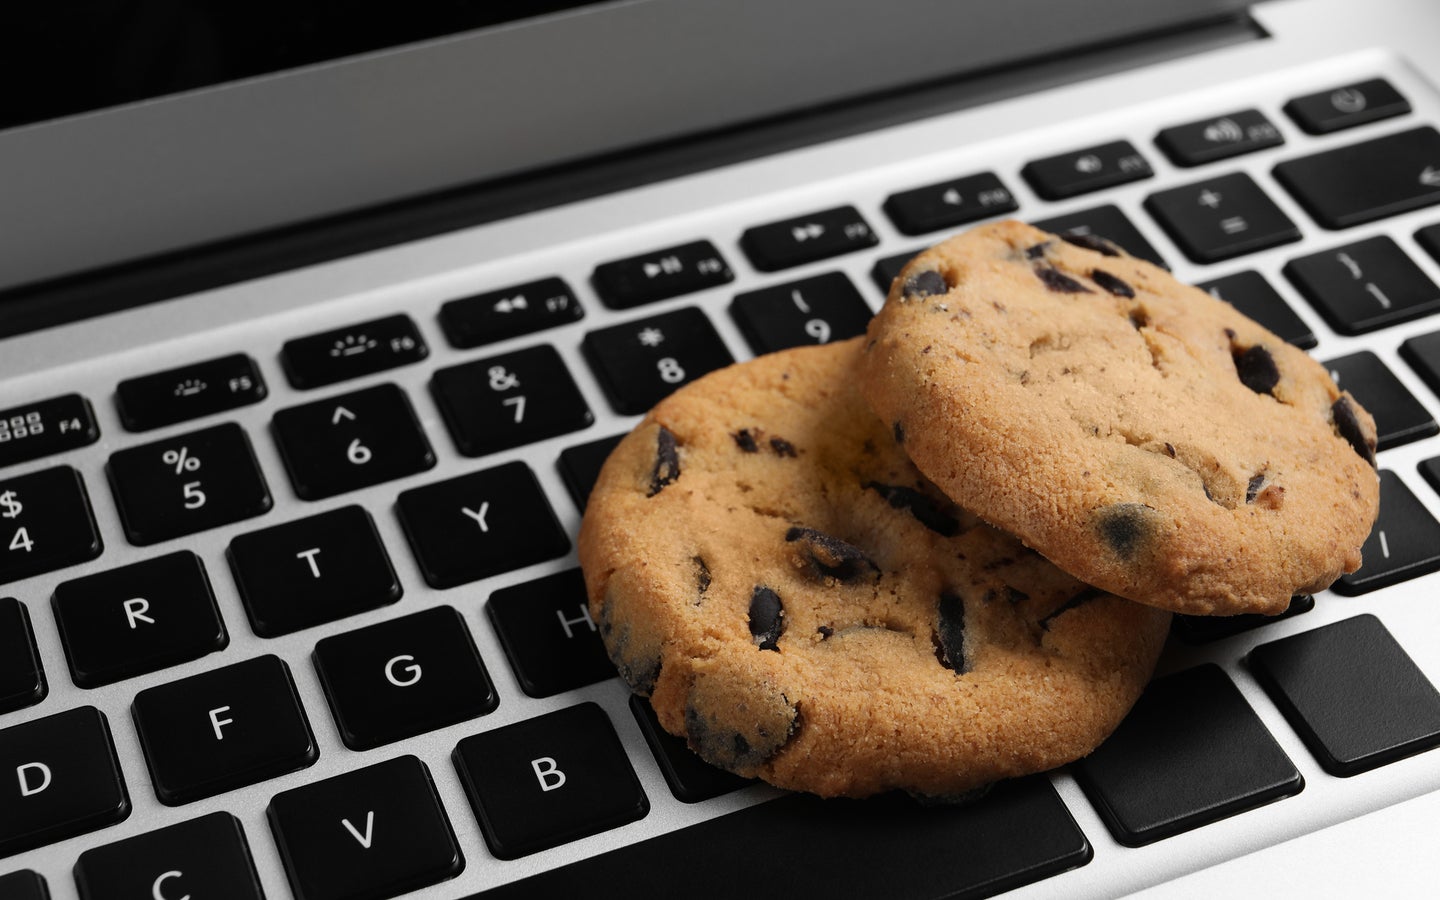 Browsing internet with tracking cookies